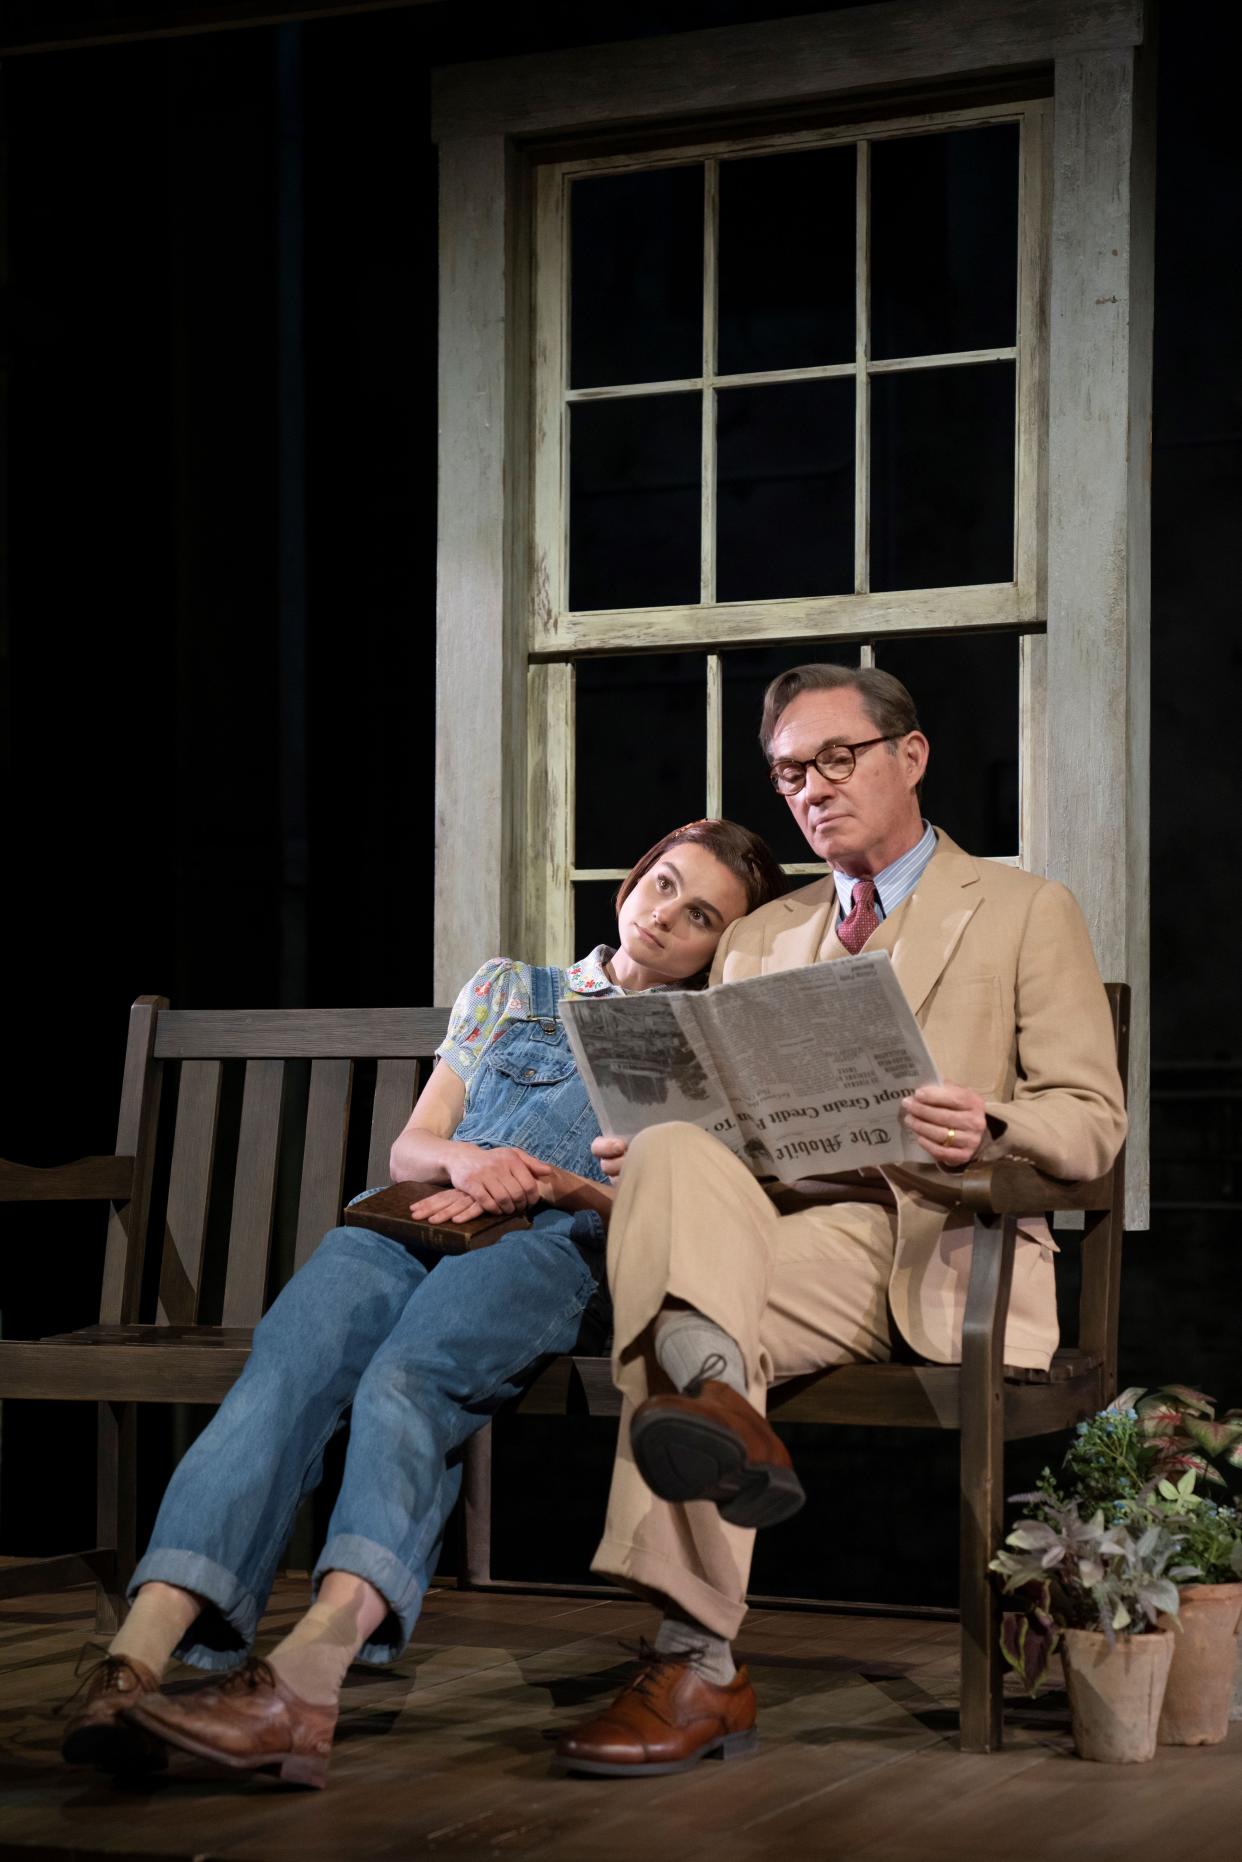 The national tour of "To Kill a Mockingbird" sold over 96% of capacity Nov. 7-12 at Milwaukee's Marcus Performing Arts Center.